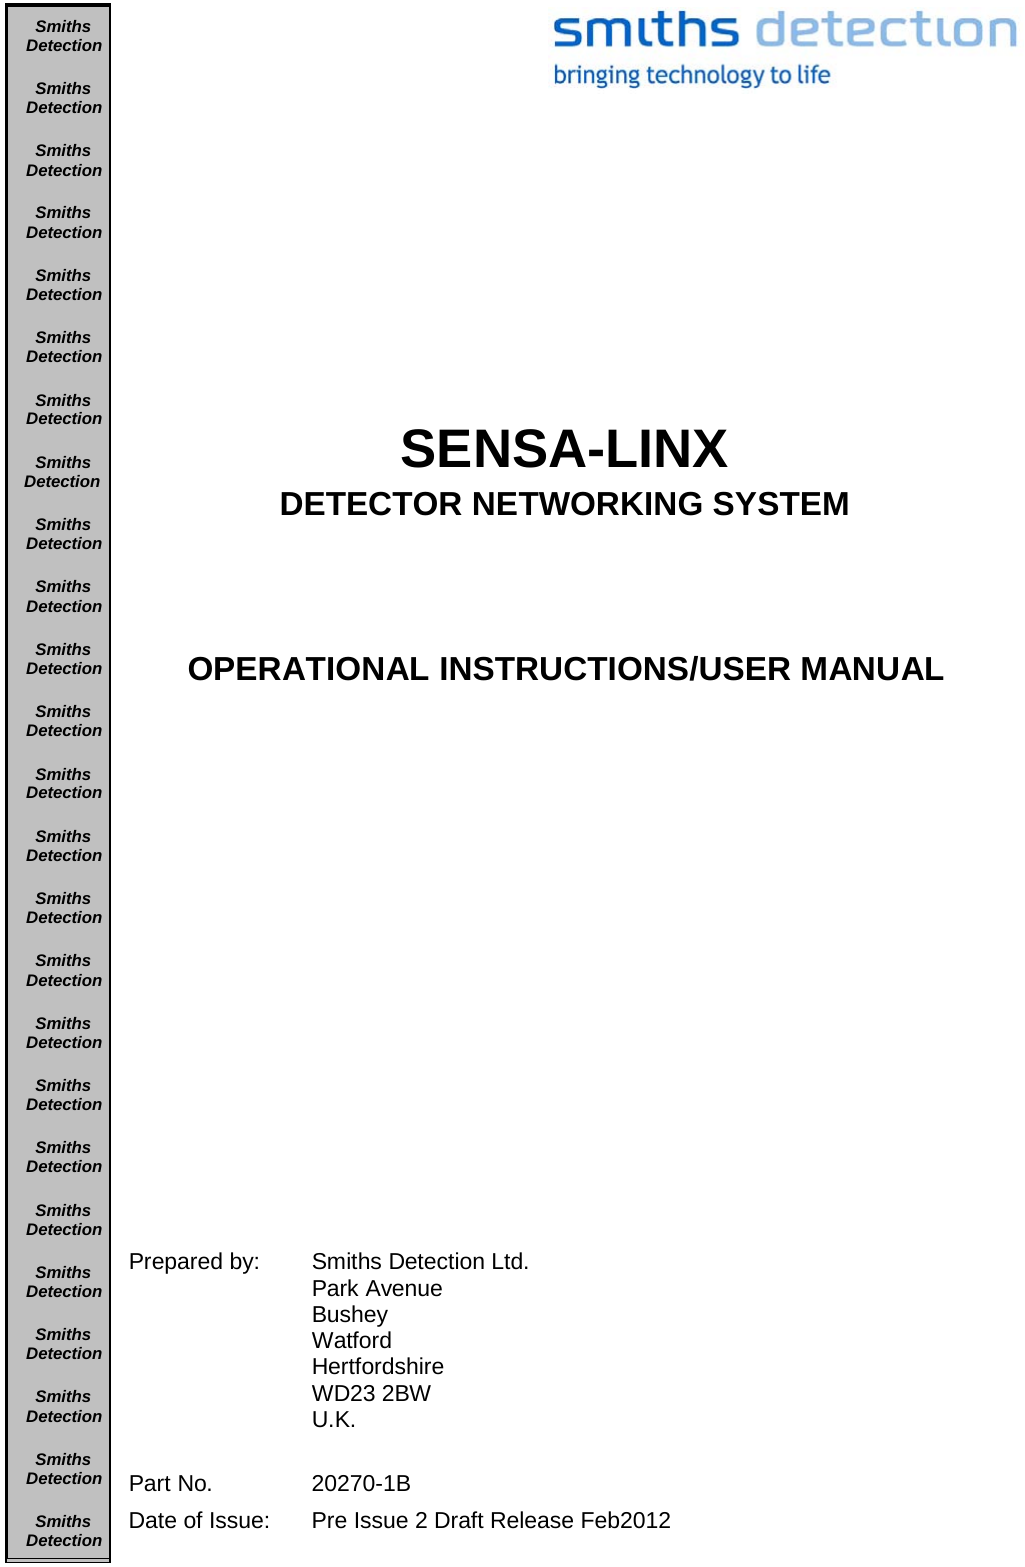              SENSA-LINX DETECTOR NETWORKING SYSTEM    OPERATIONAL INSTRUCTIONS/USER MANUAL                     Prepared by: Smiths Detection Ltd. Park Avenue Bushey Watford Hertfordshire WD23 2BW U.K.    Part No. 20270-1B Date of Issue:  Pre Issue 2 Draft Release Feb2012 SmithsDetectionSmithsDetectionSmithsDetectionSmithsDetectionSmithsDetectionSmithsDetectionSmithsDetectionSmithsDetectionSmithsDetectionSmithsDetectionSmithsDetectionSmithsDetectionSmithsDetectionSmithsDetectionSmithsDetectionSmithsDetectionSmithsDetectionSmithsDetectionSmithsDetectionSmithsDetectionSmithsDetectionSmithsDetectionSmithsDetectionSmithsDetectionSmithsDetection  